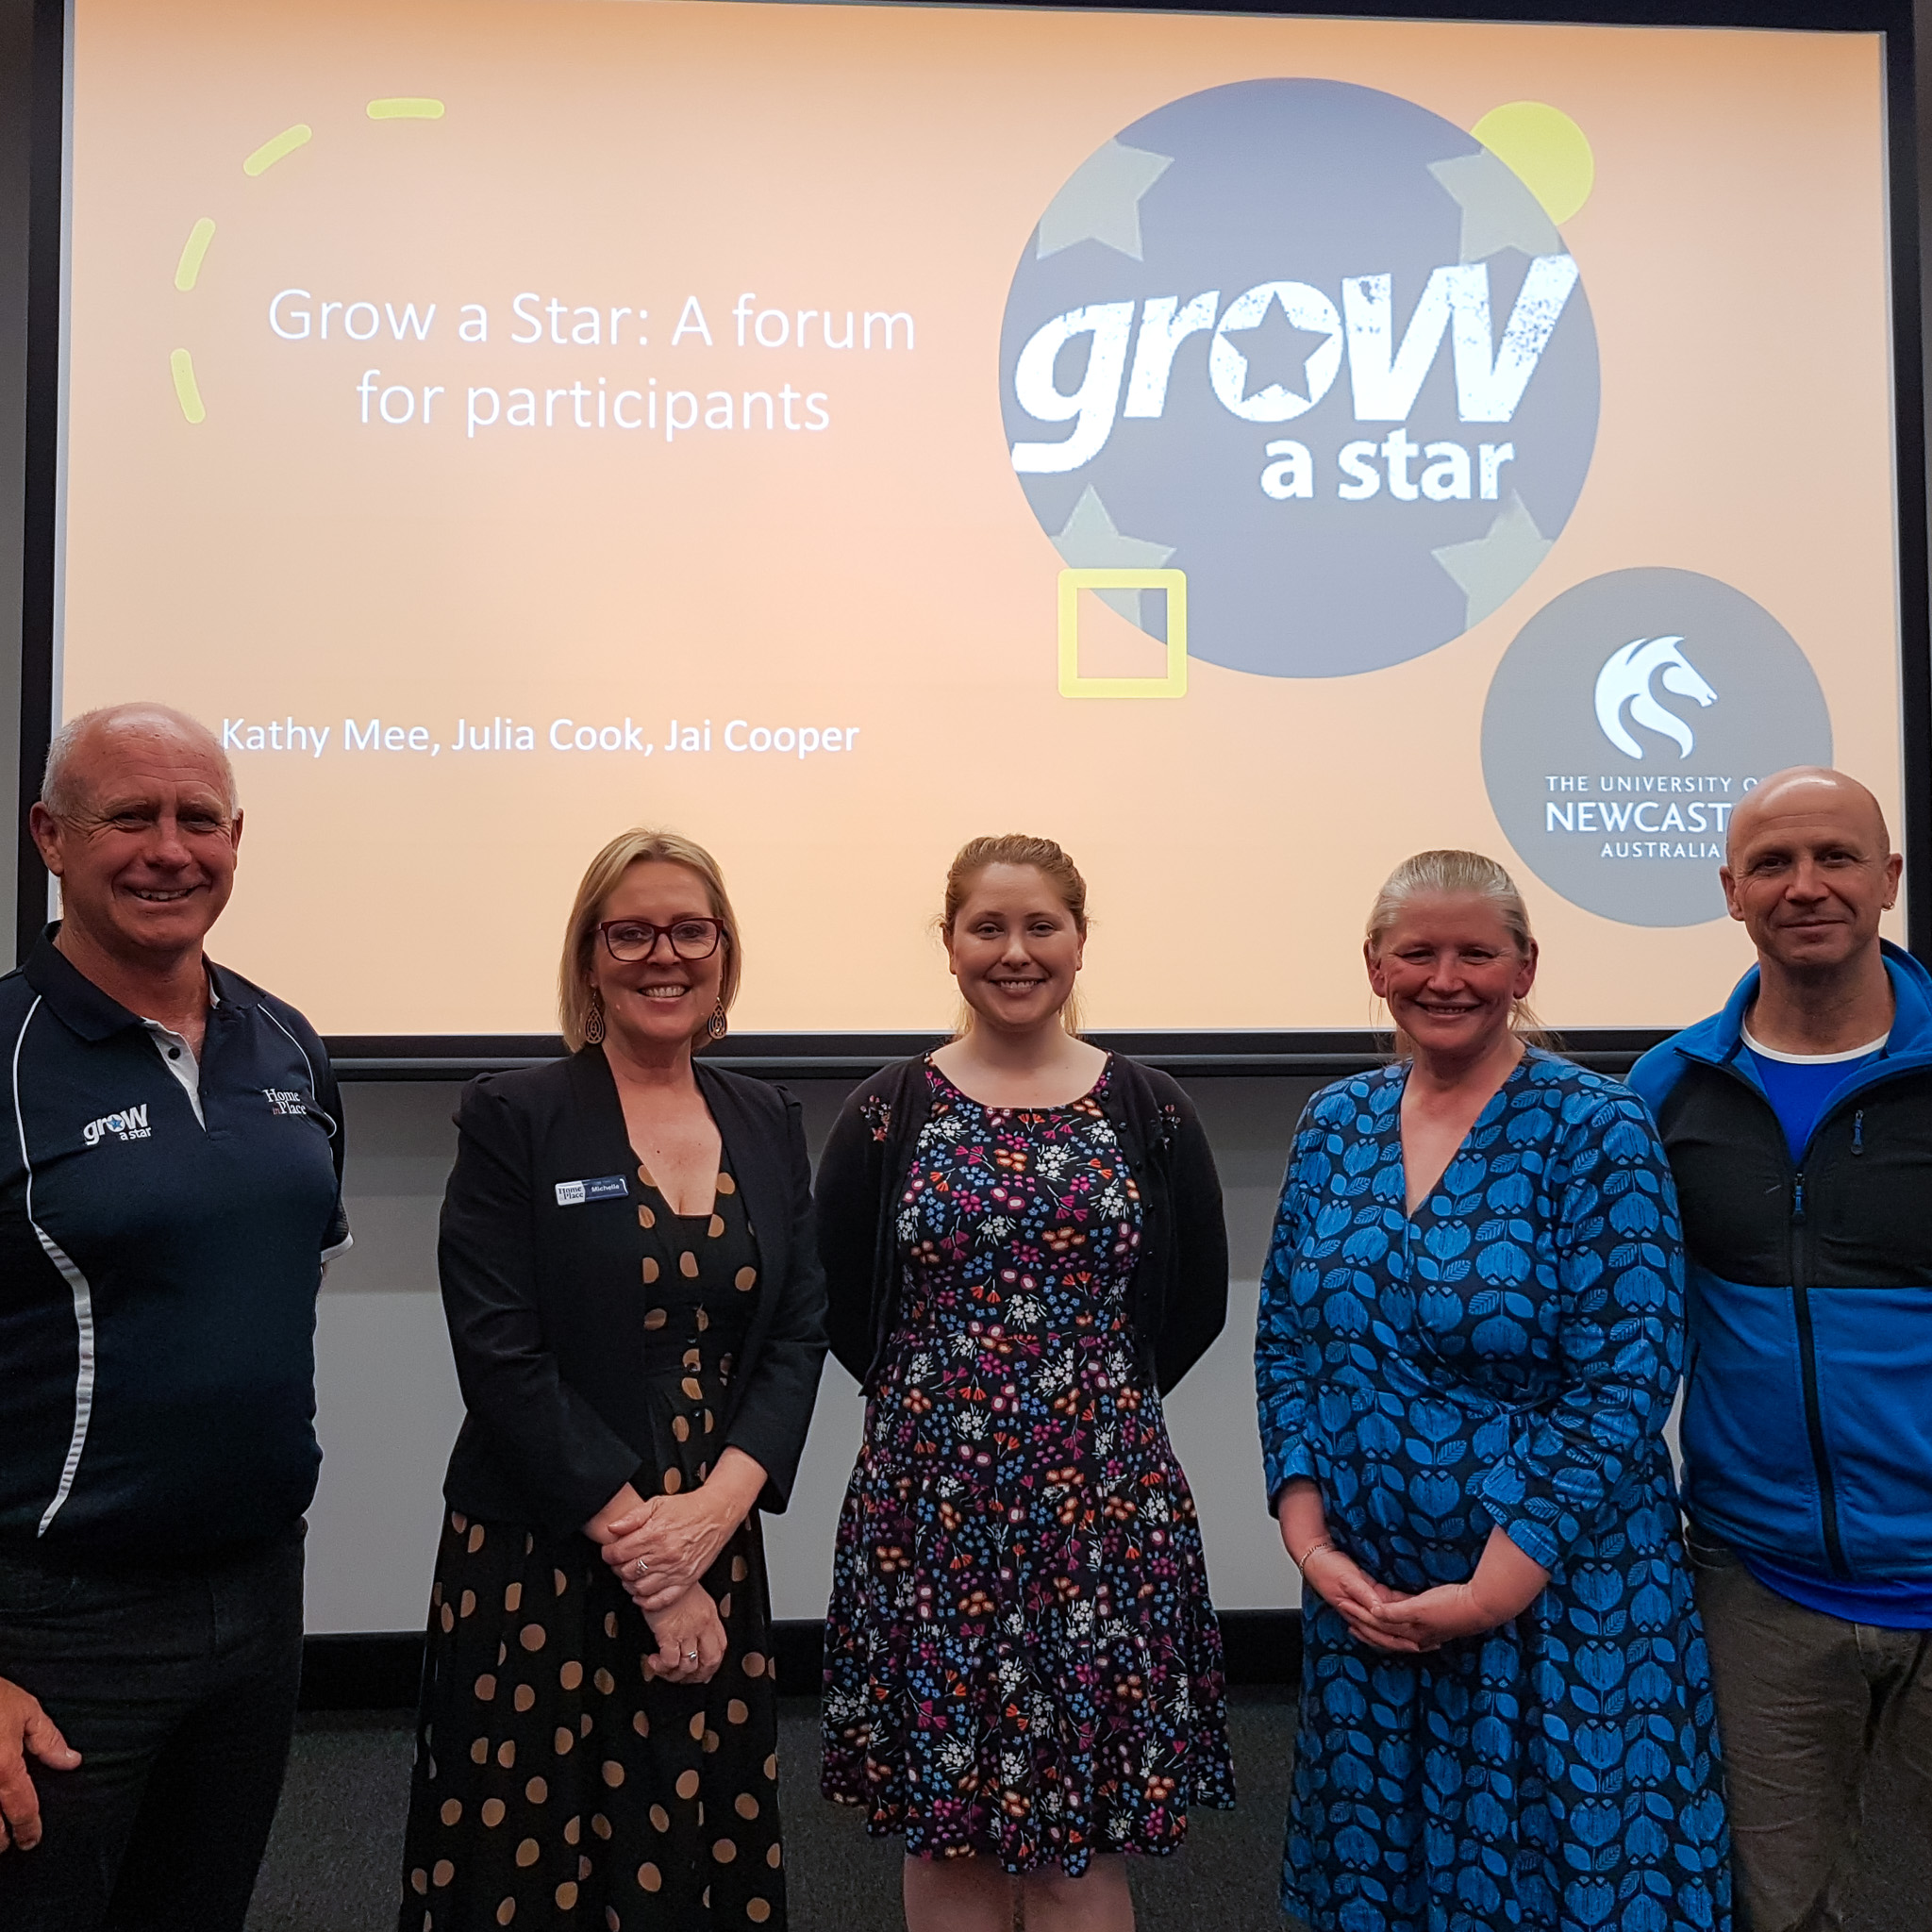 From left to right: Shane Marshall (Grow a Star), Michelle Faithful (Grow a Star), Dr Julia Cook (UON), A. Prof. Kathy Mee (UON) and Dr Jai Cooper (UON)^empty:{ds__assetid^as_asset:asset_name}